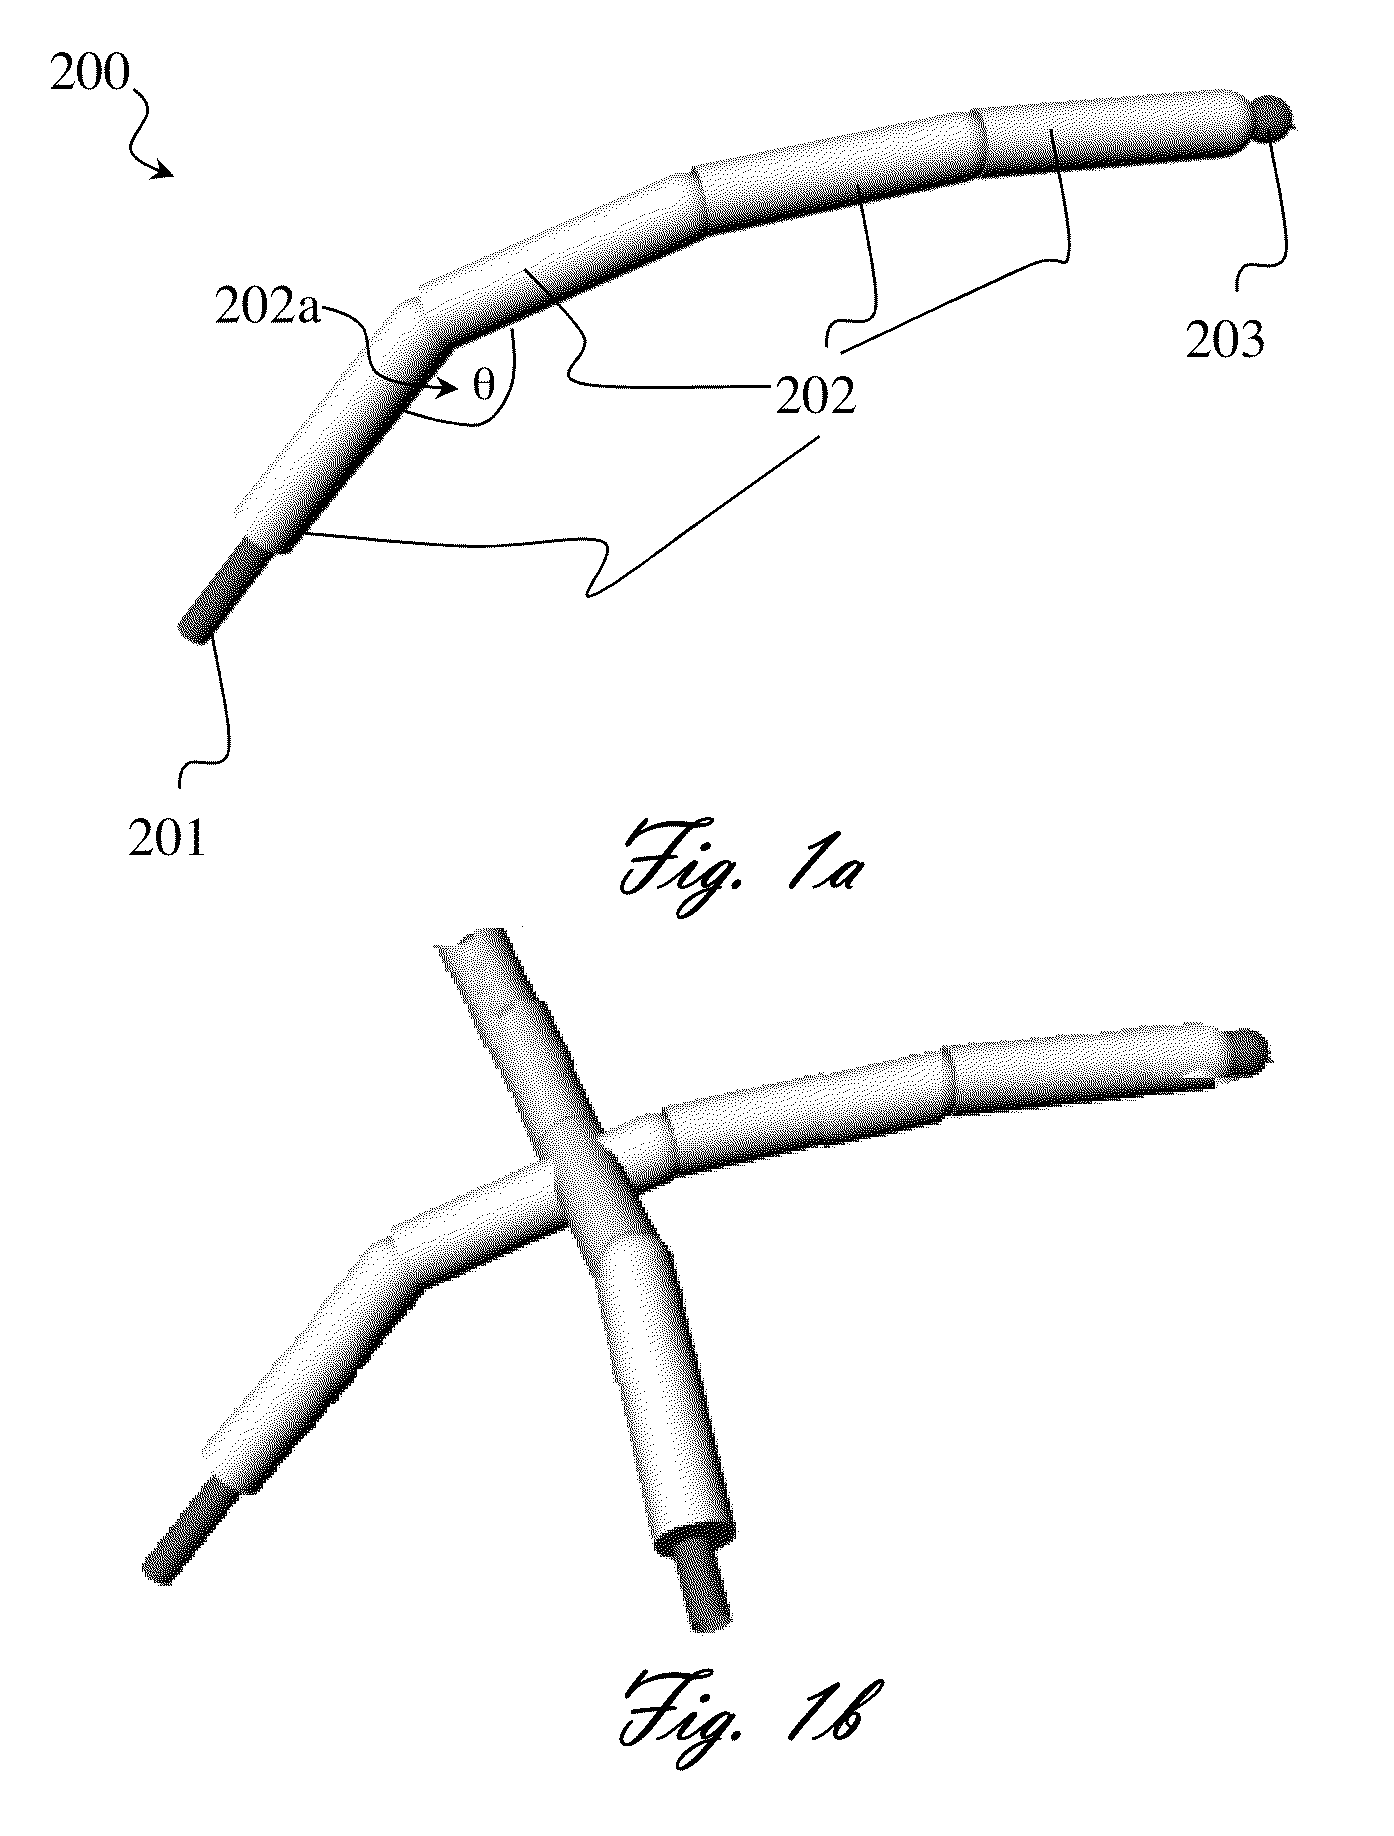 Flexible segmented support structure